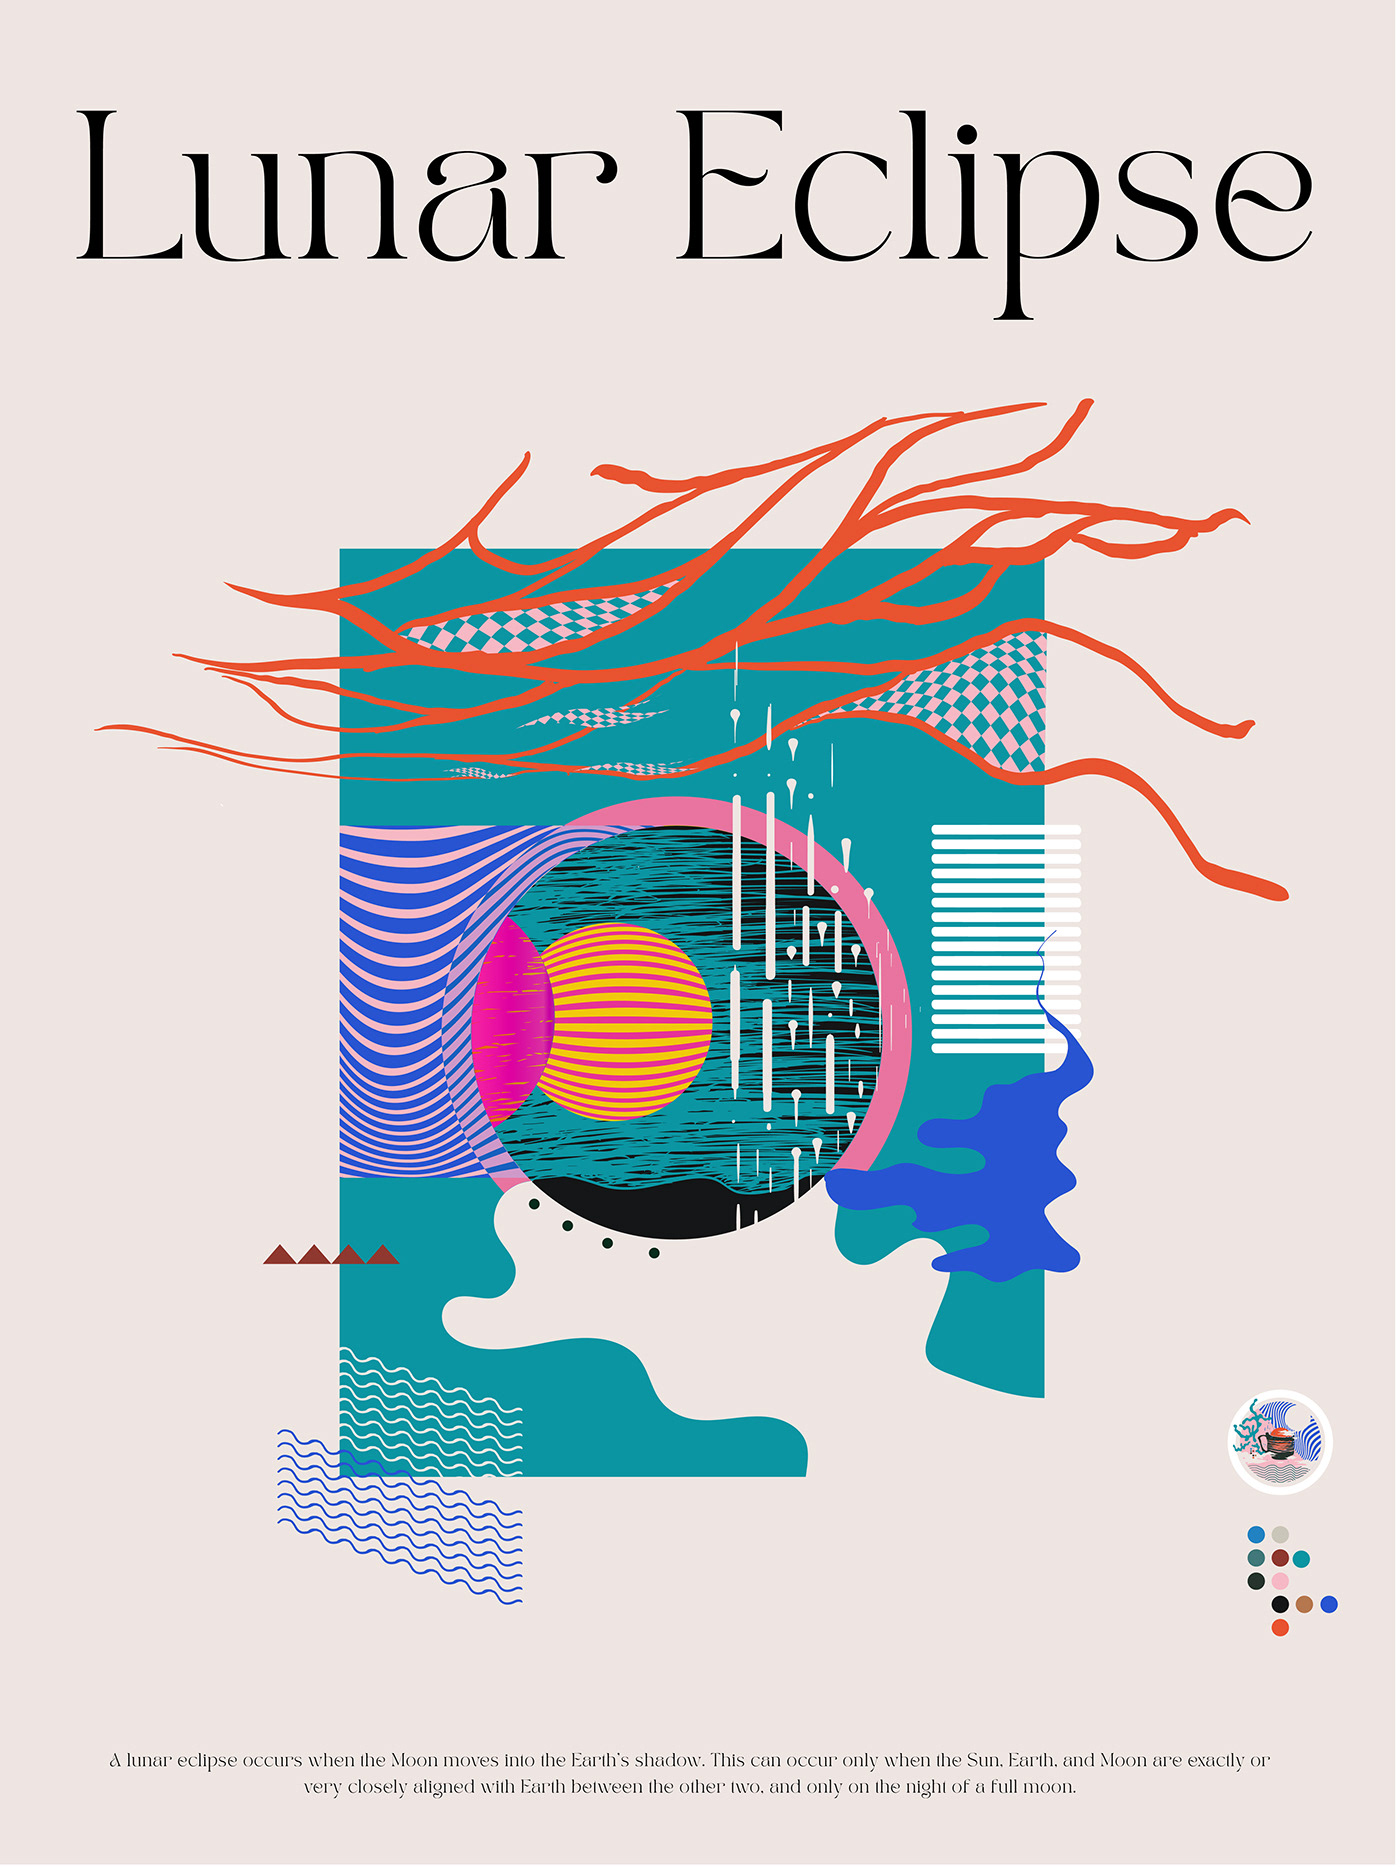 #abstractart #adobe #artcover #drawing #illustration #LunarEclipse #paint   #Poster #retro